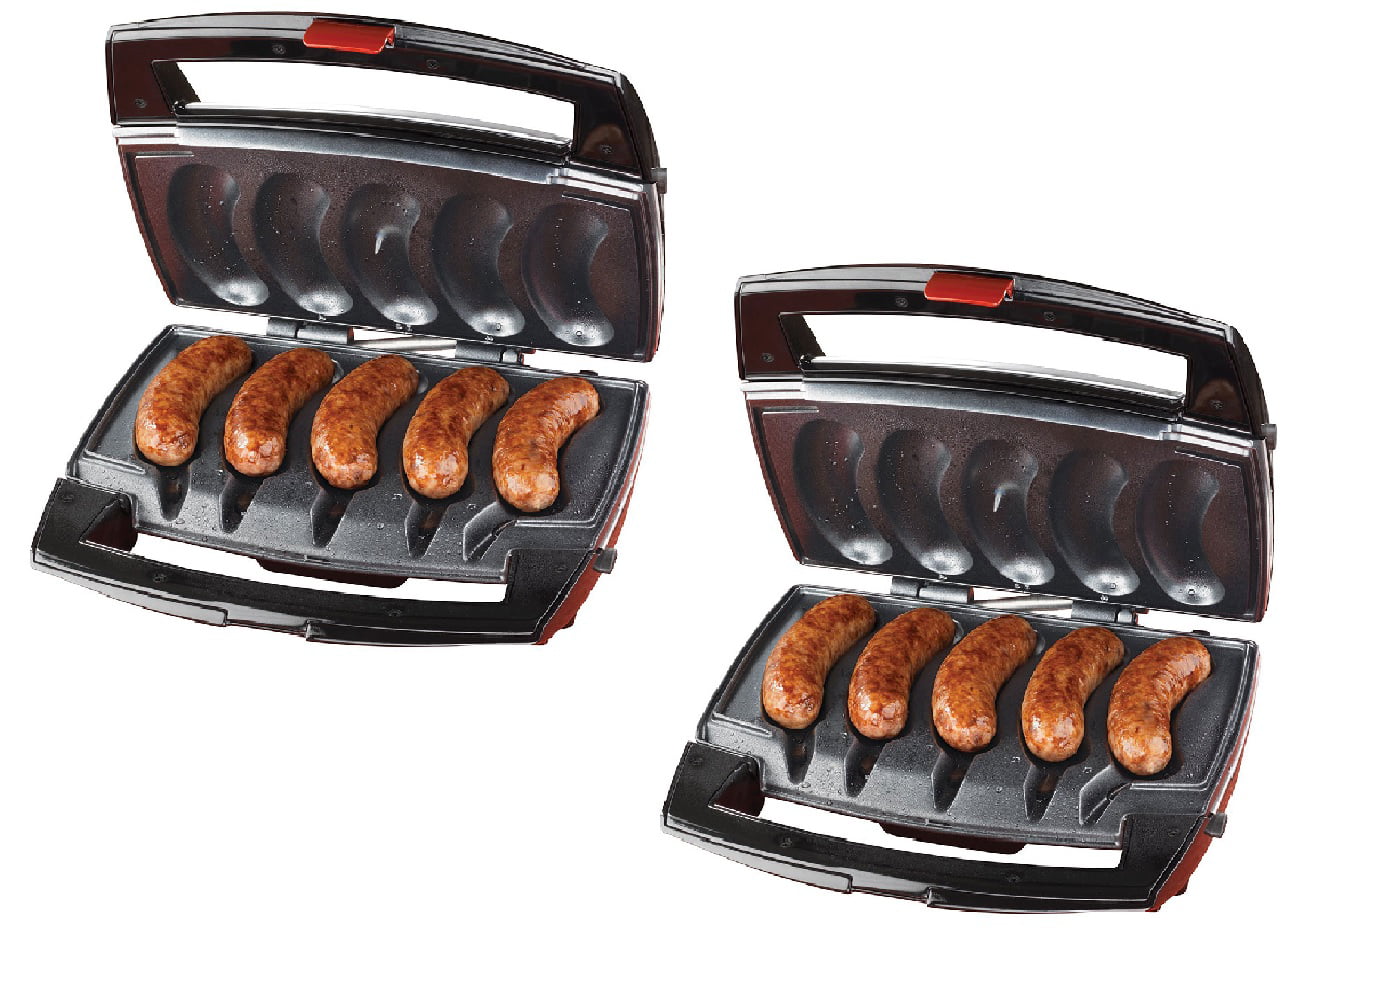 Sizzling Sausage 3-in-1 Black Indoor Electric Grill with Removable